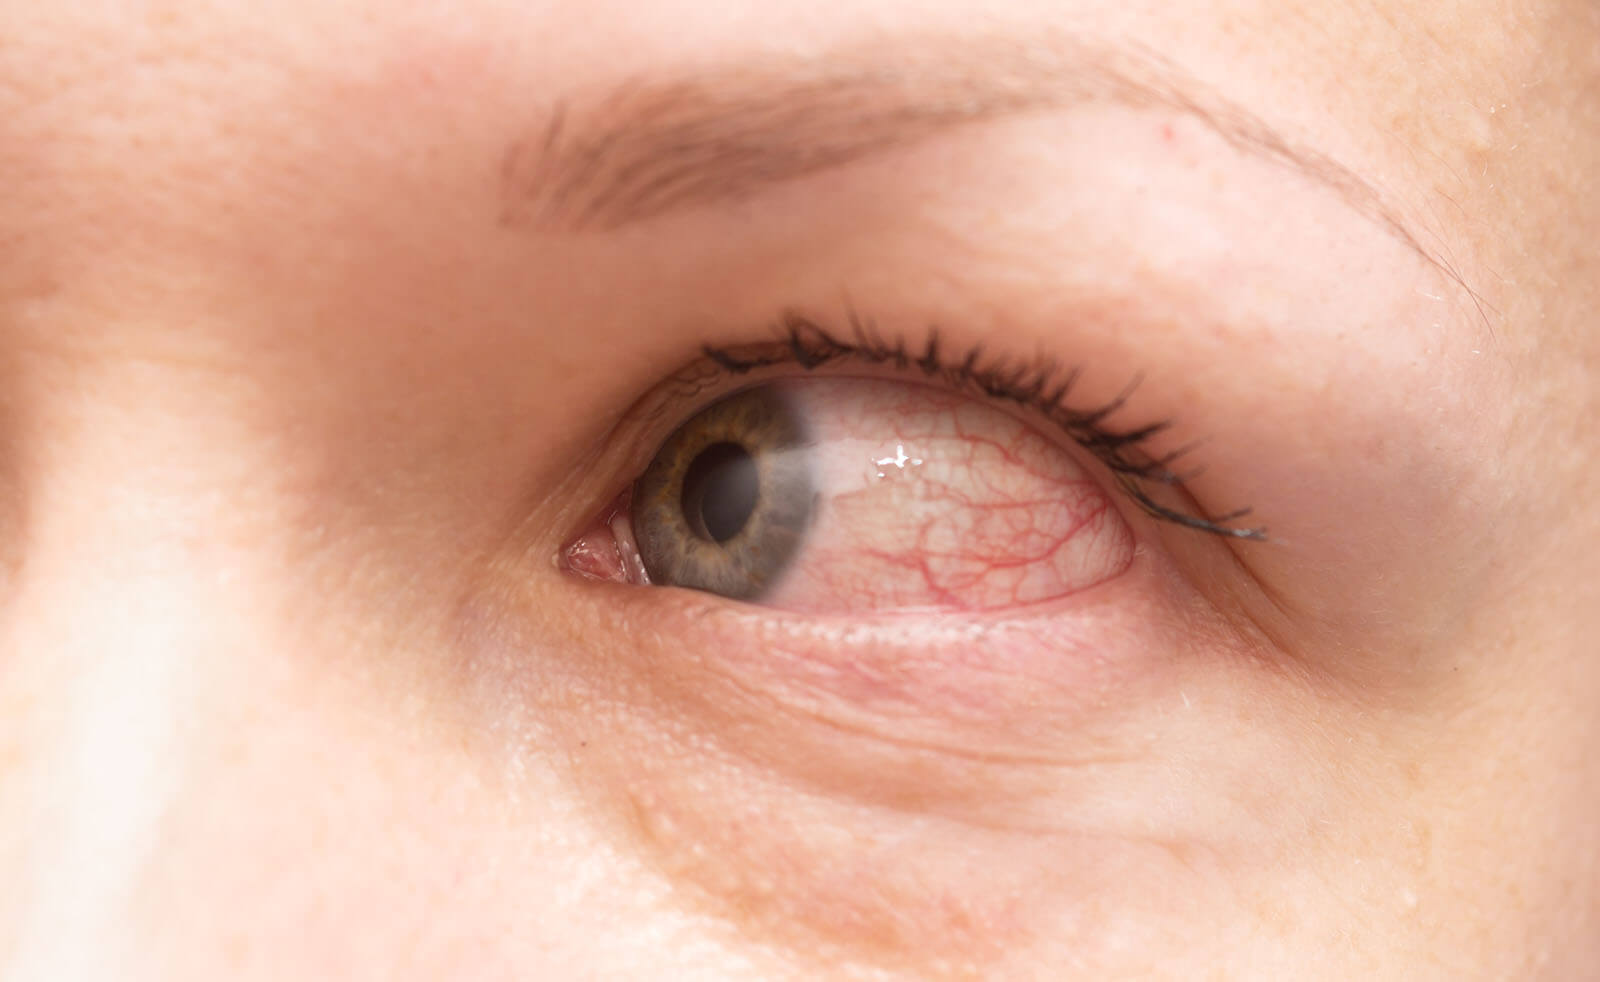 Itchy red eye, symptomatic of an eye allergy.